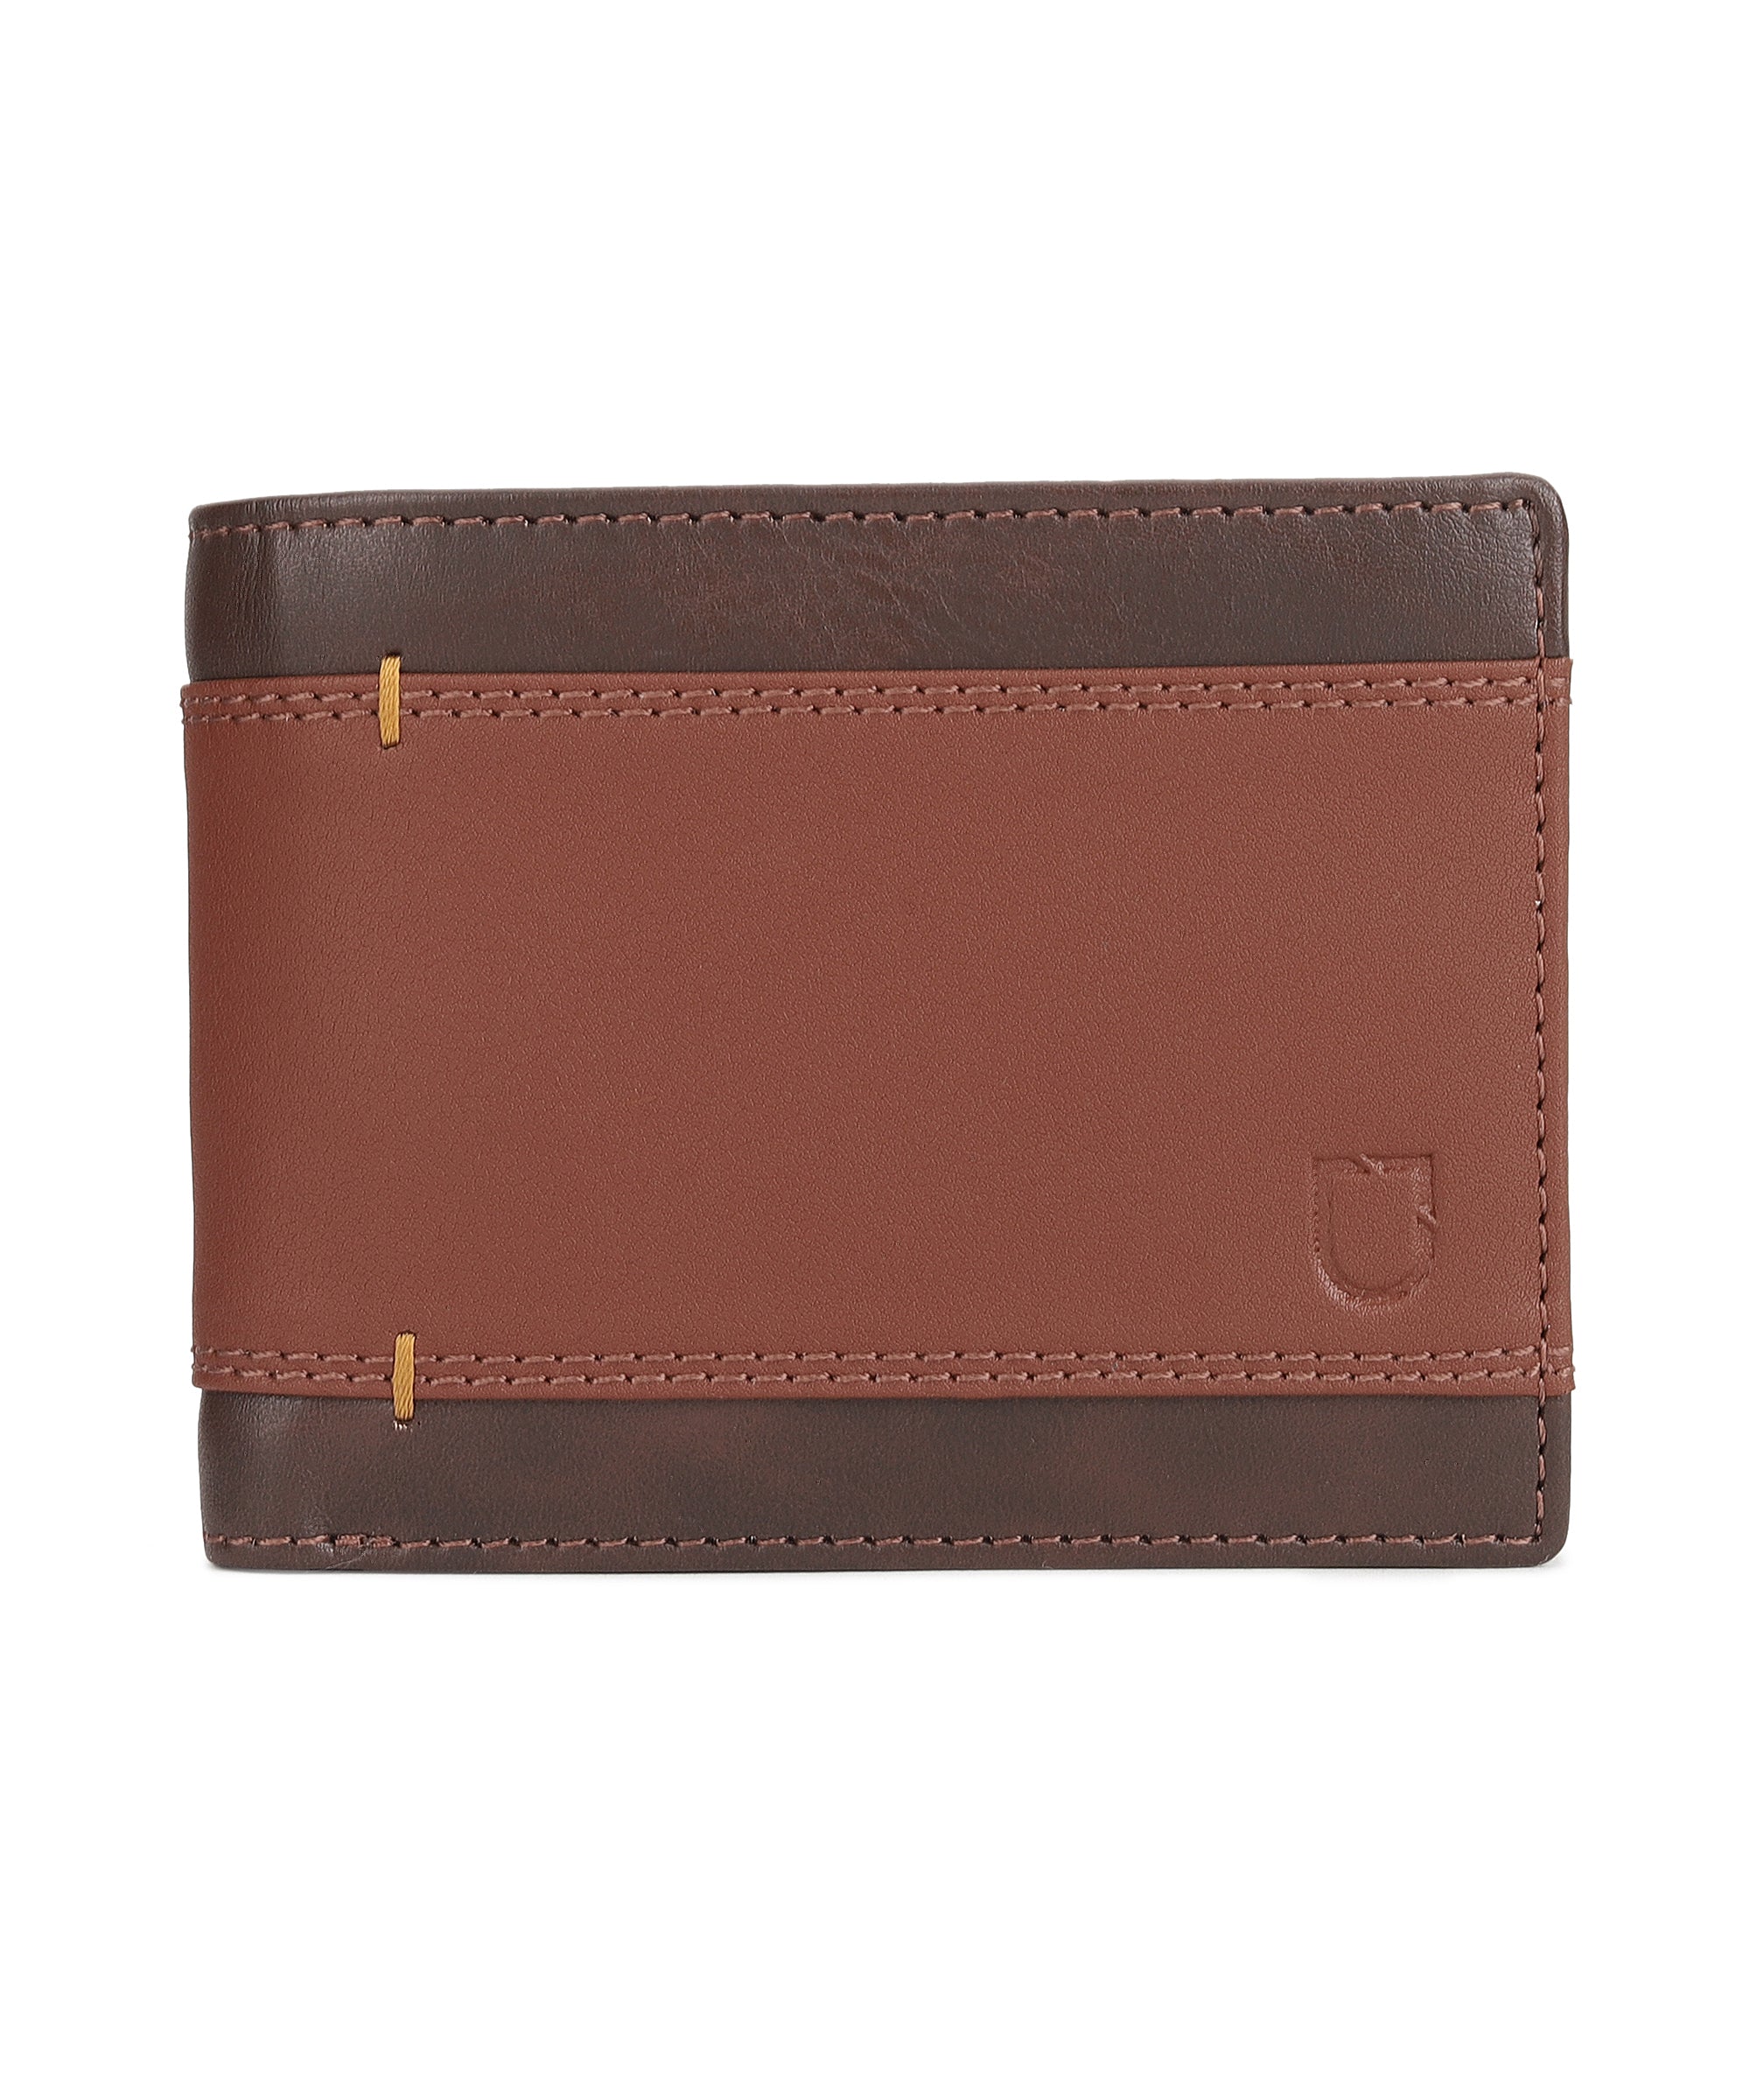 Urbano Fashion Men's Brown Casual, Formal Leather Wallet-6 Card Slots